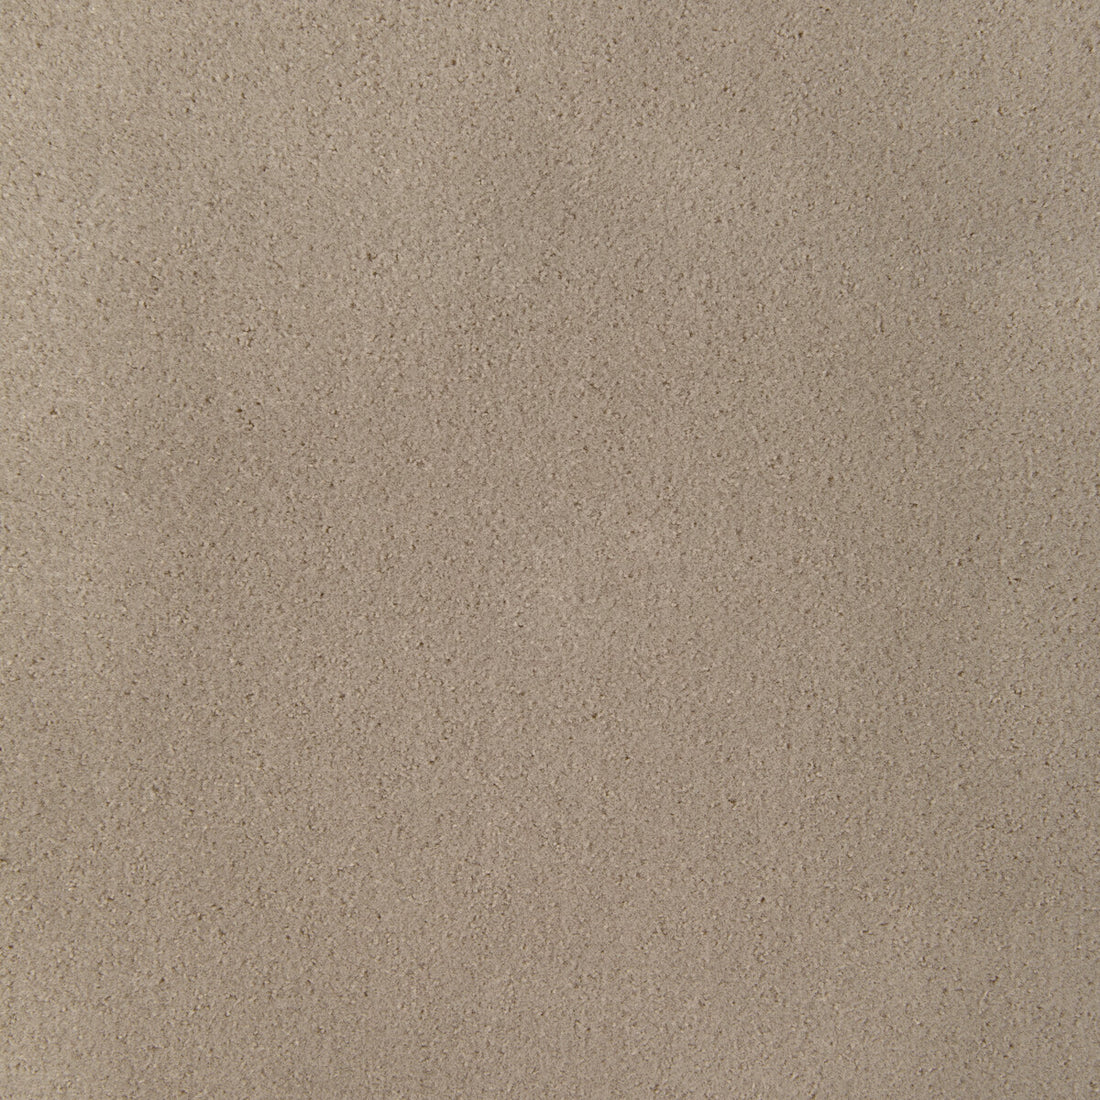 Fomo fabric in fawn color - pattern 36543.16.0 - by Kravet Contract